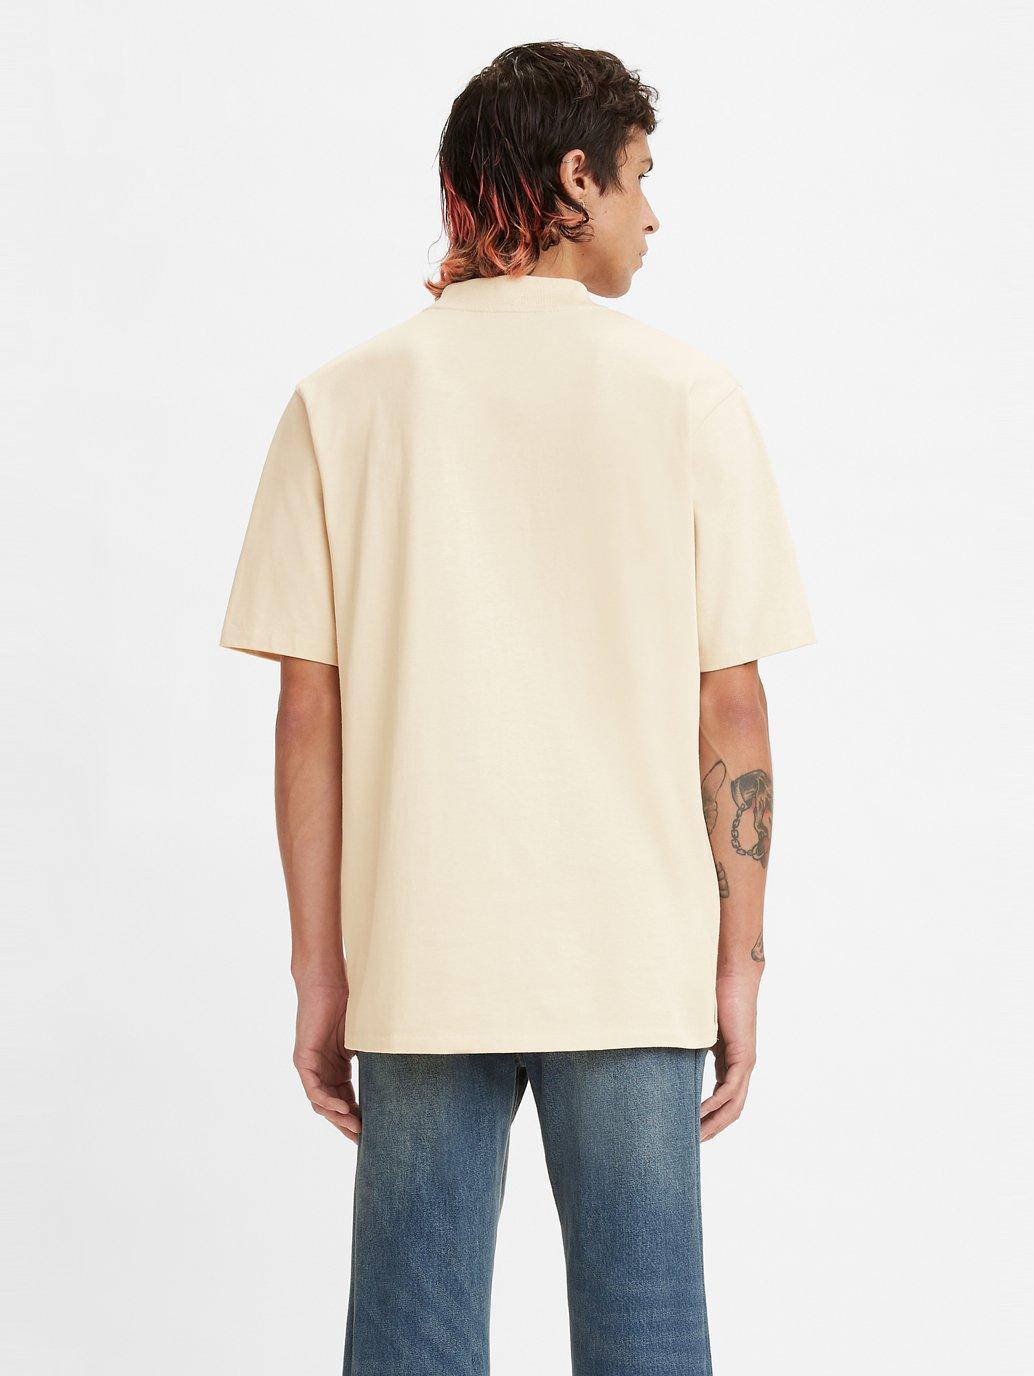 Buy Levi's® Made & Crafted® Men's Mock Tee| Levi’s® Official Online ...